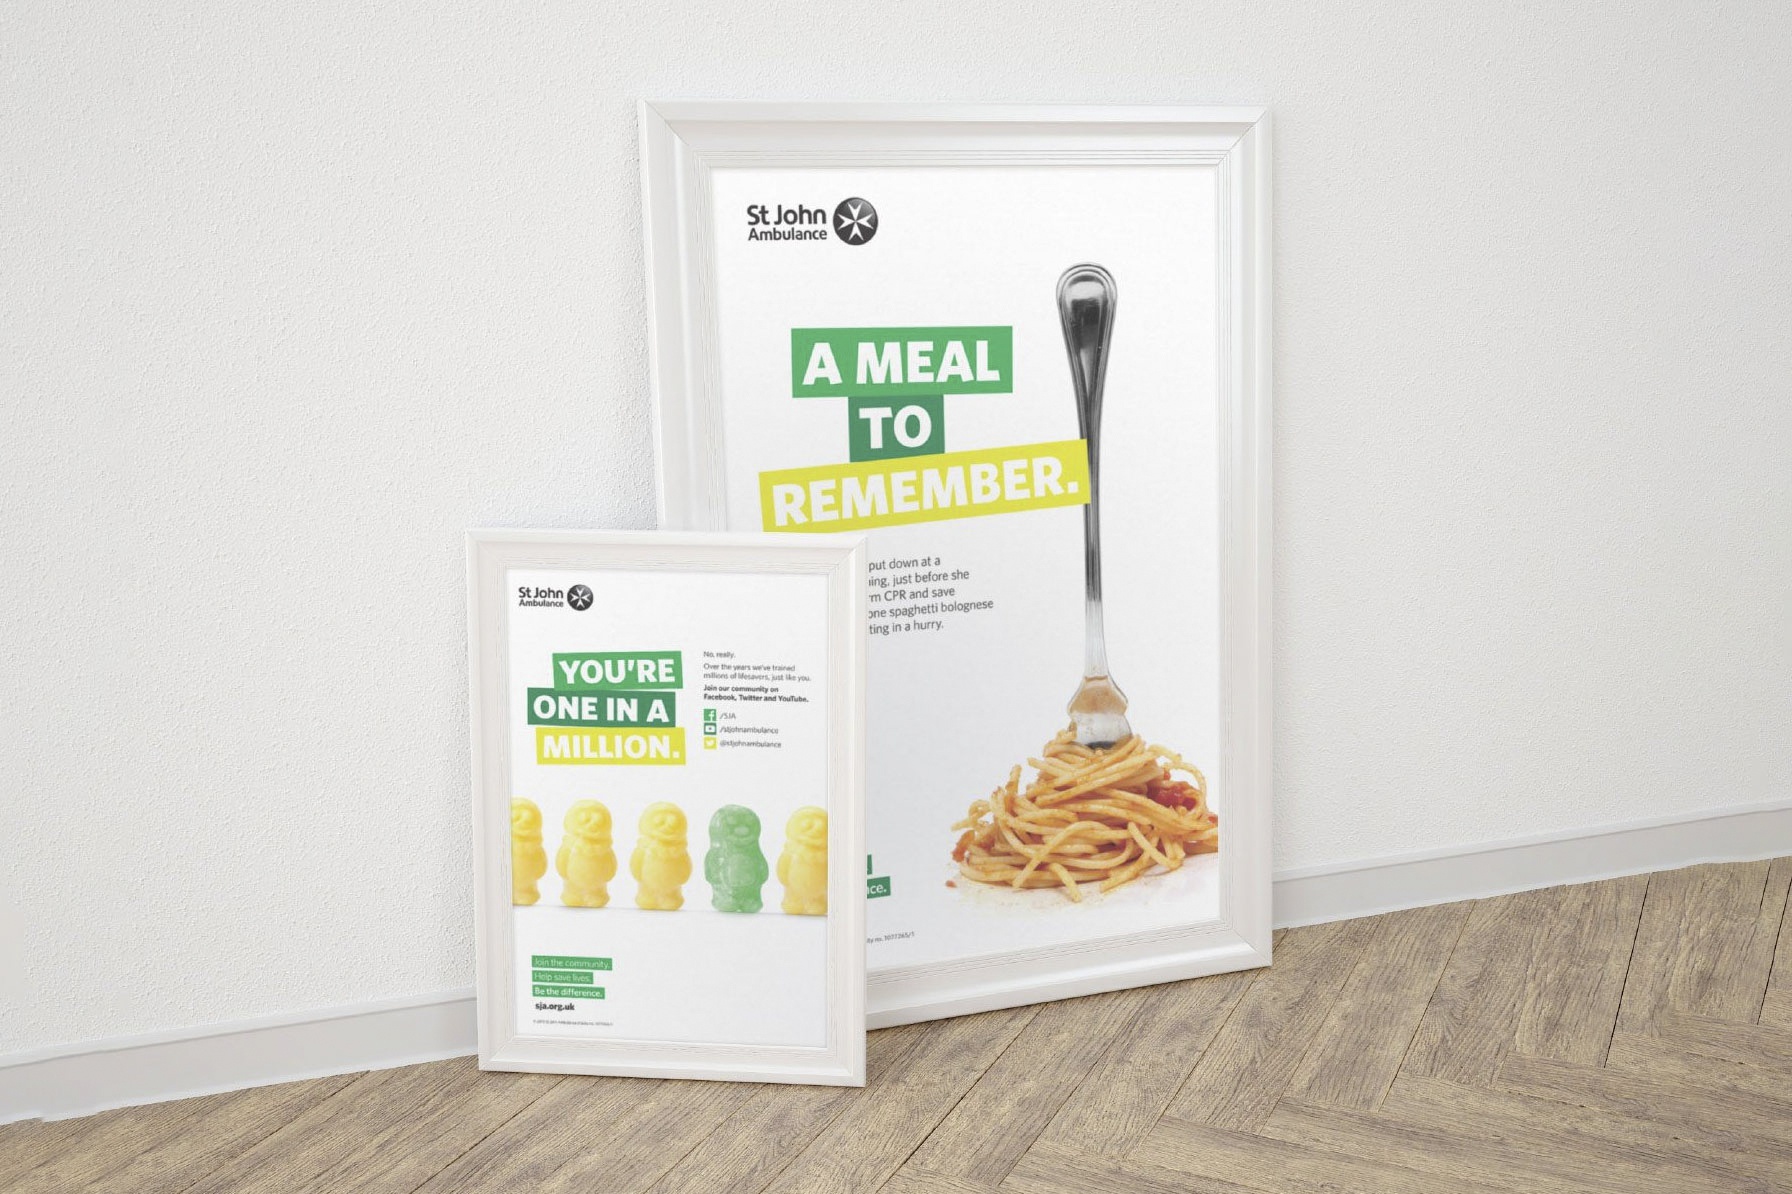 Image showing two posters using the new brand identity